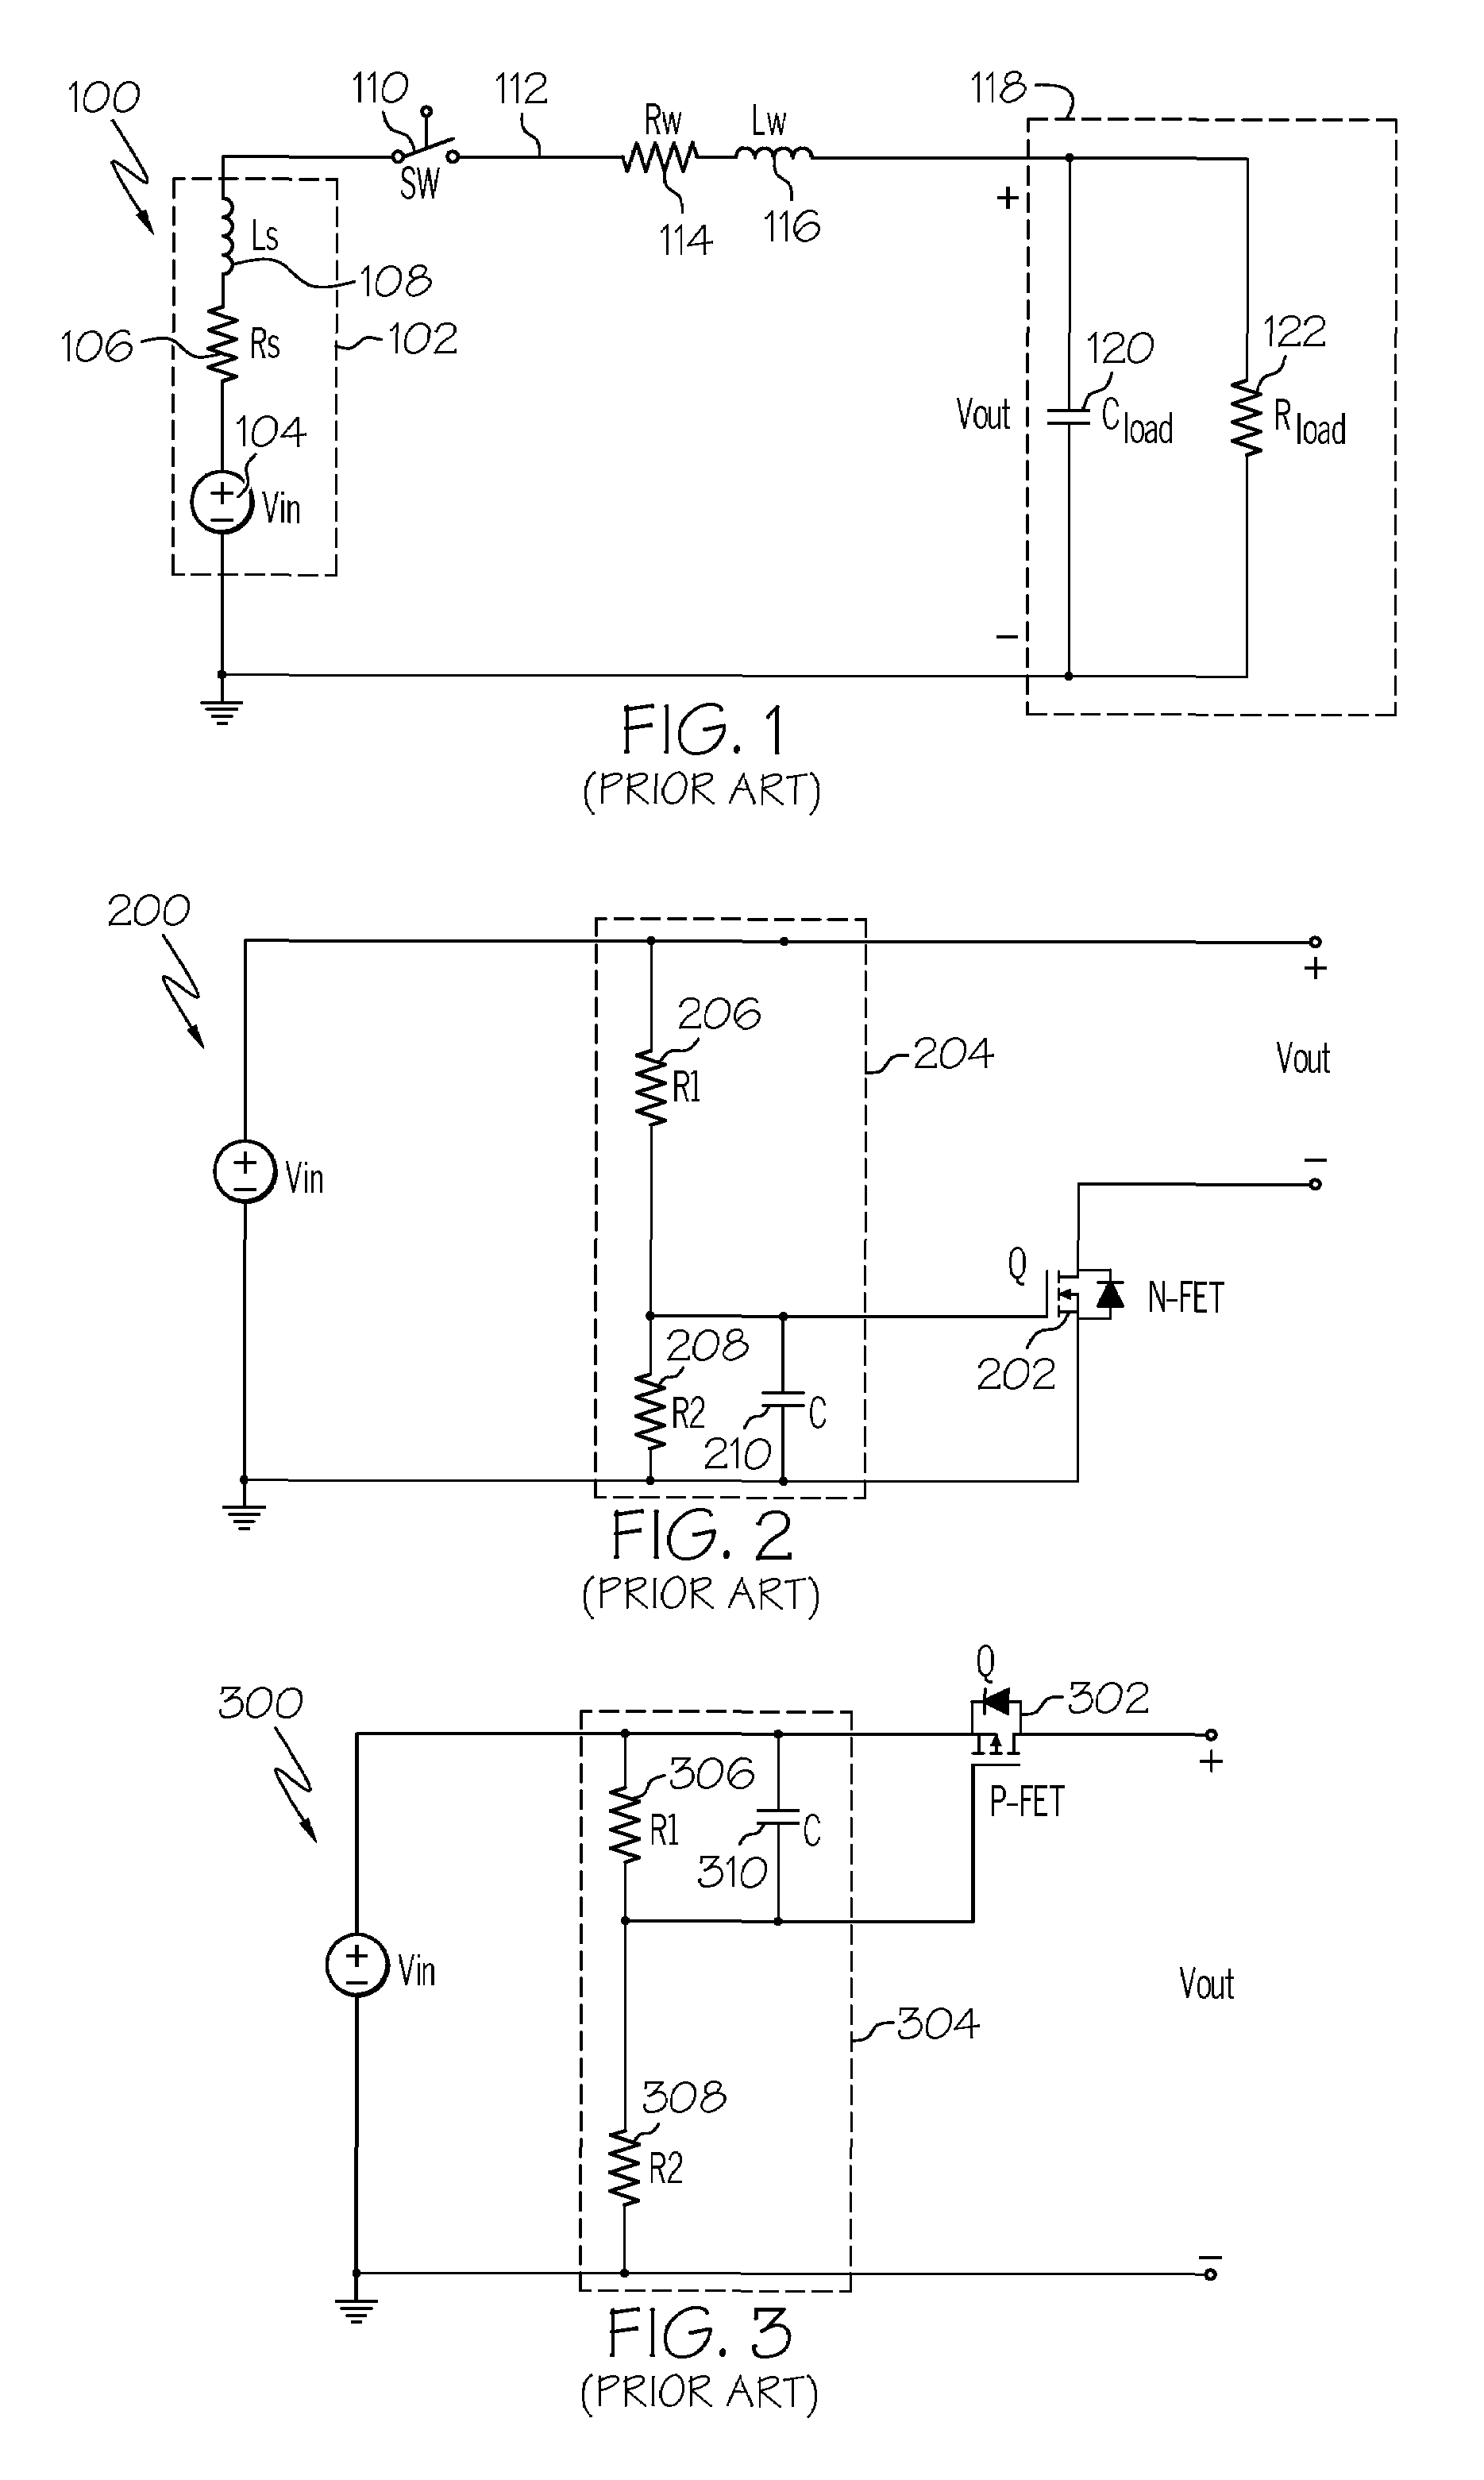 Advanced inrush/transient current limit and overload/short circuit protection method and apparatus for DC voltage power supply